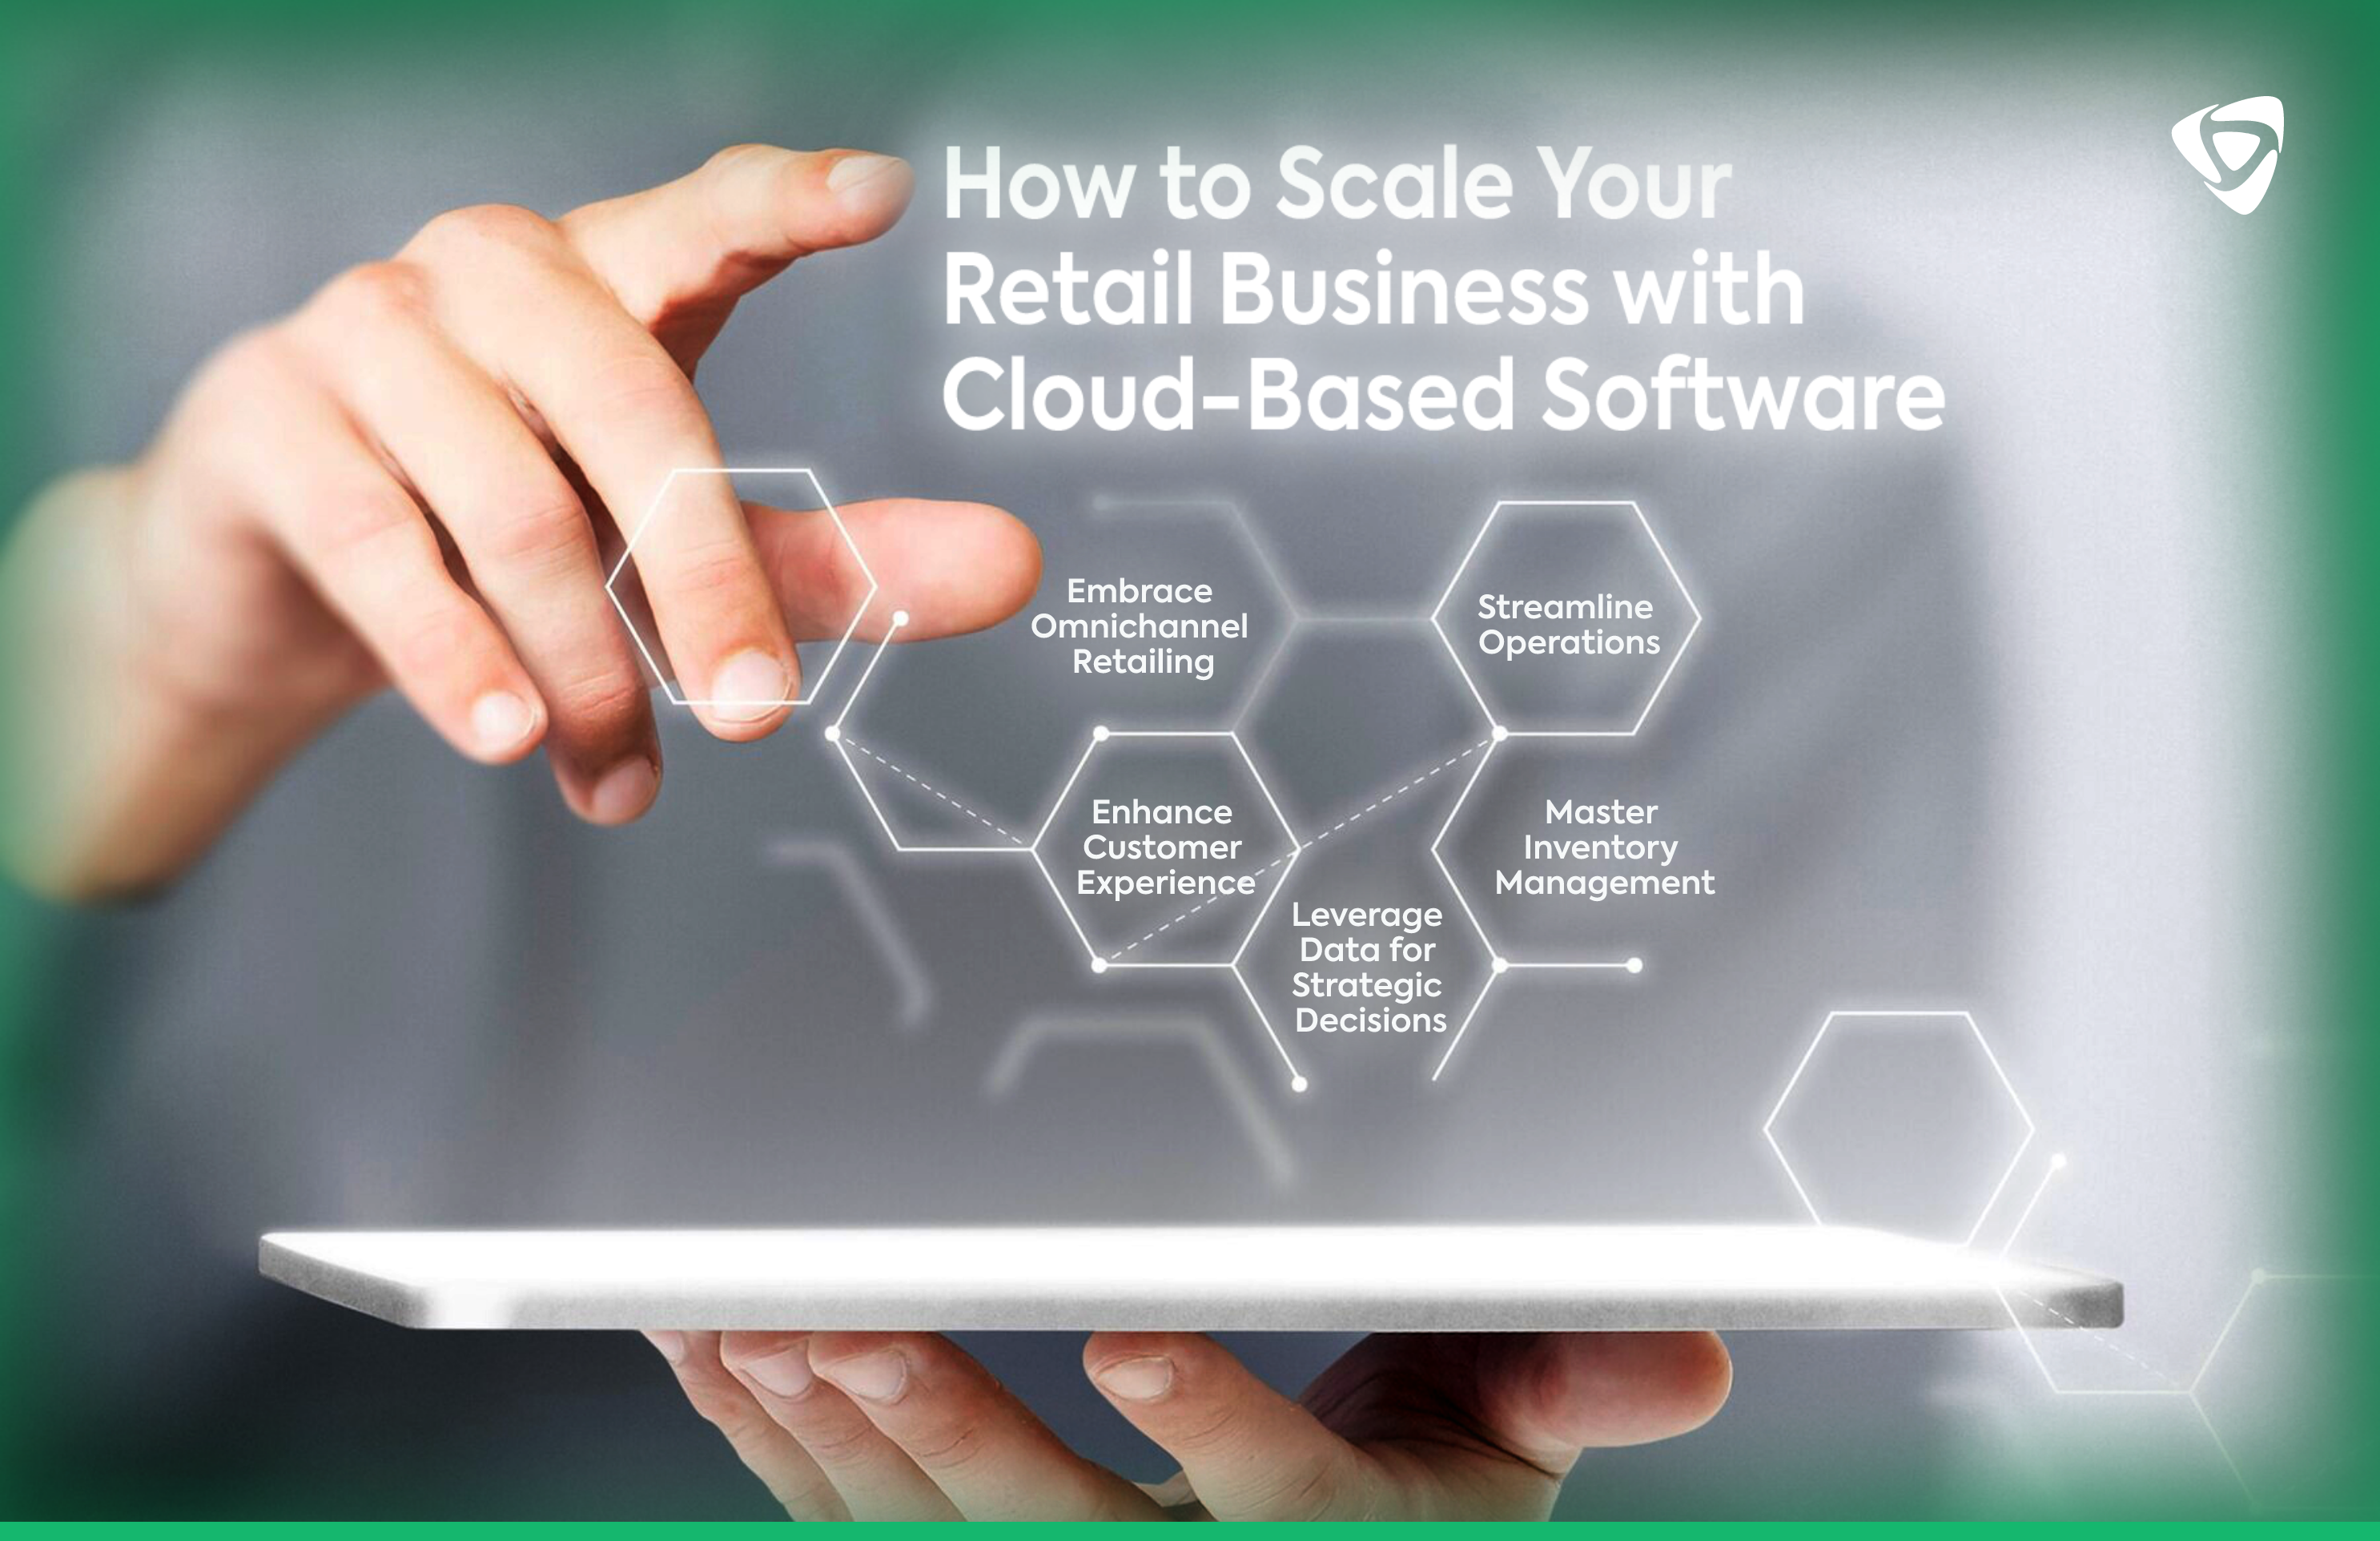 How to Scale Your Retail Business with Cloud-Based Software